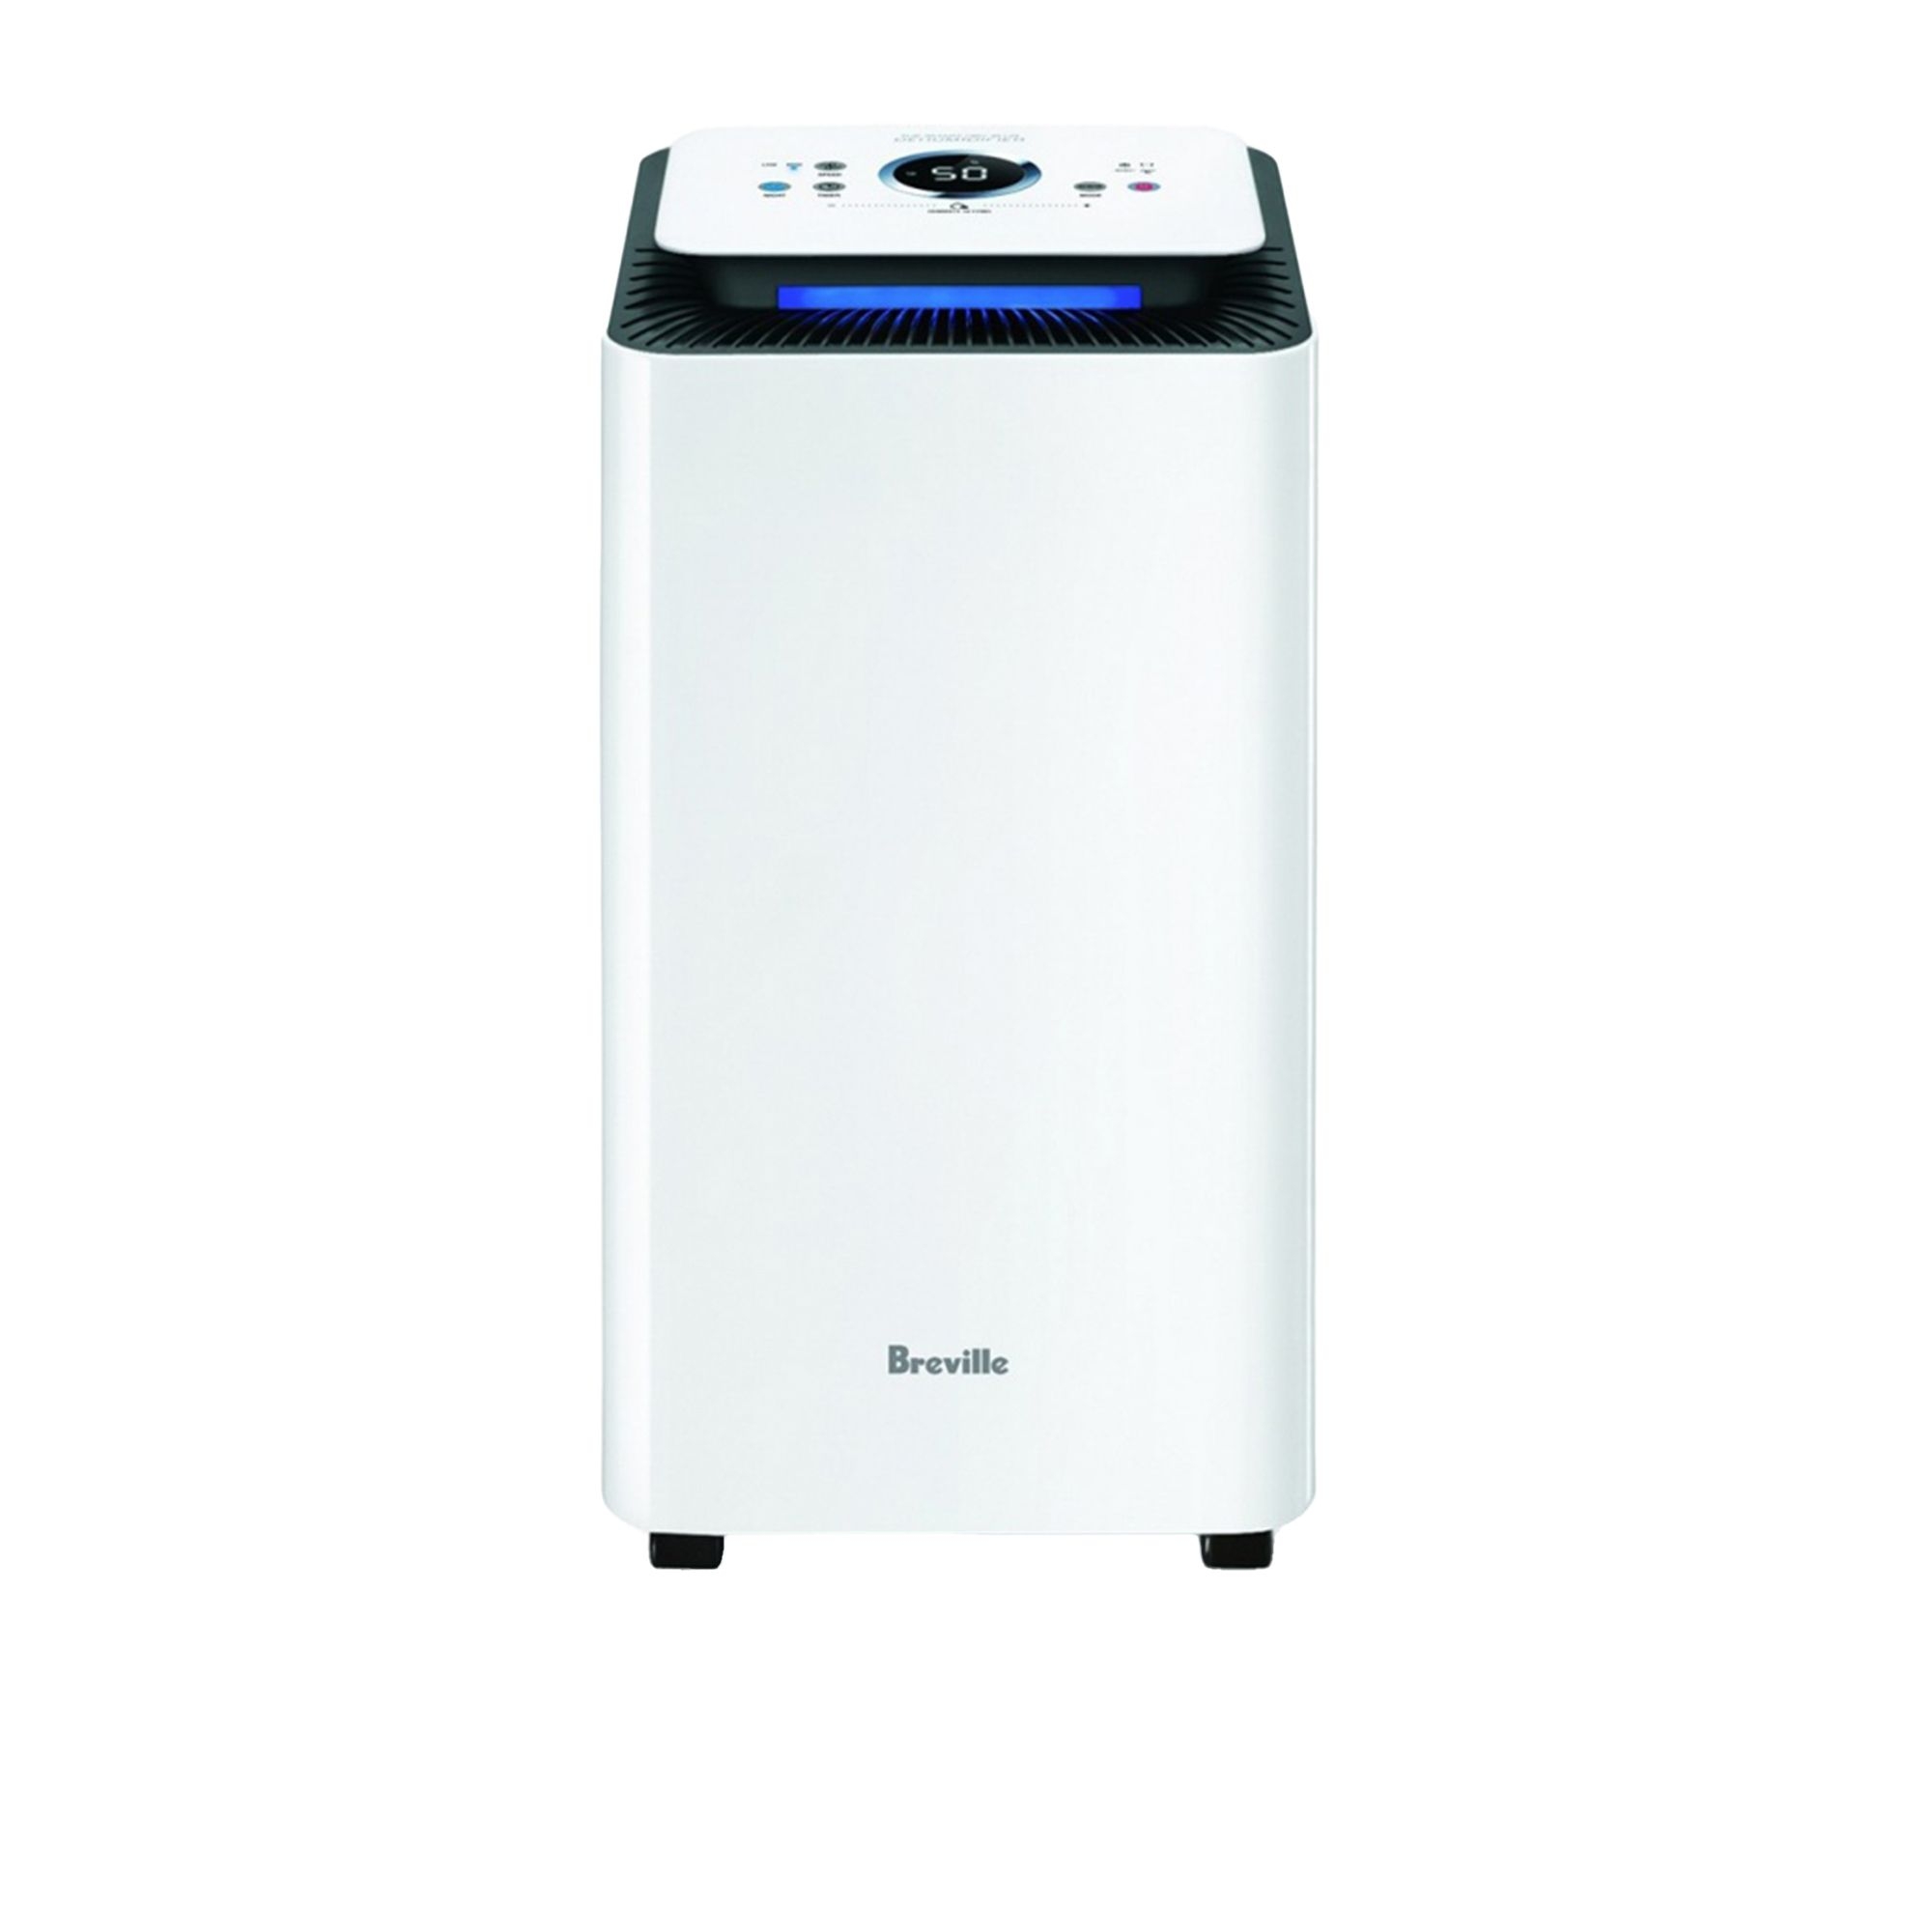 Breville The Smart Dry Dehumidifier Image 1